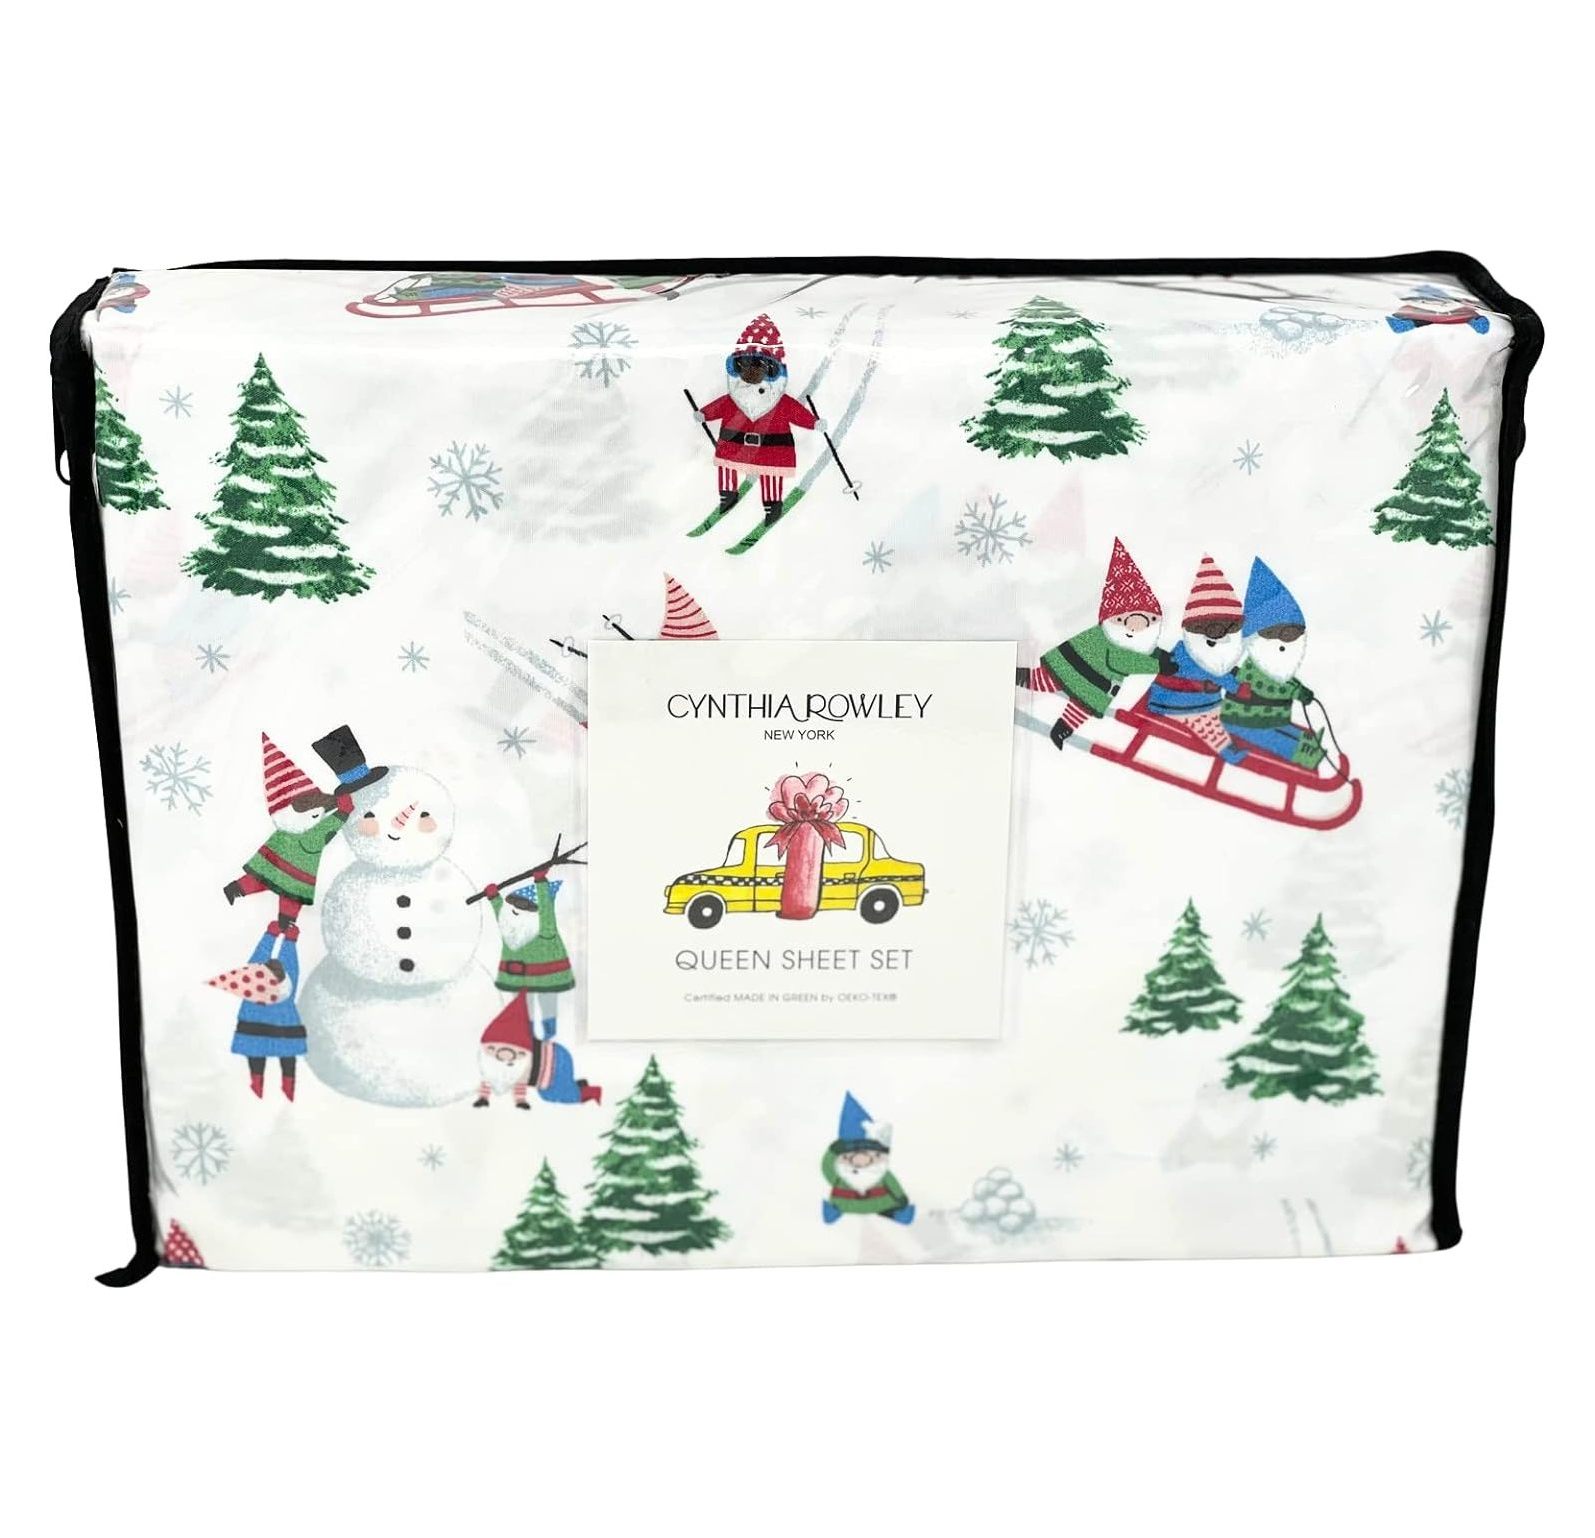 Cynthia Rowley 4 Pice Skiing Christmas Gnomes Festive Elves Trees Snowflakes Easy Care Wrinkle Free Winter Holiday Sheet Set (Queen (U.S. Standard)) - image 3 of 3